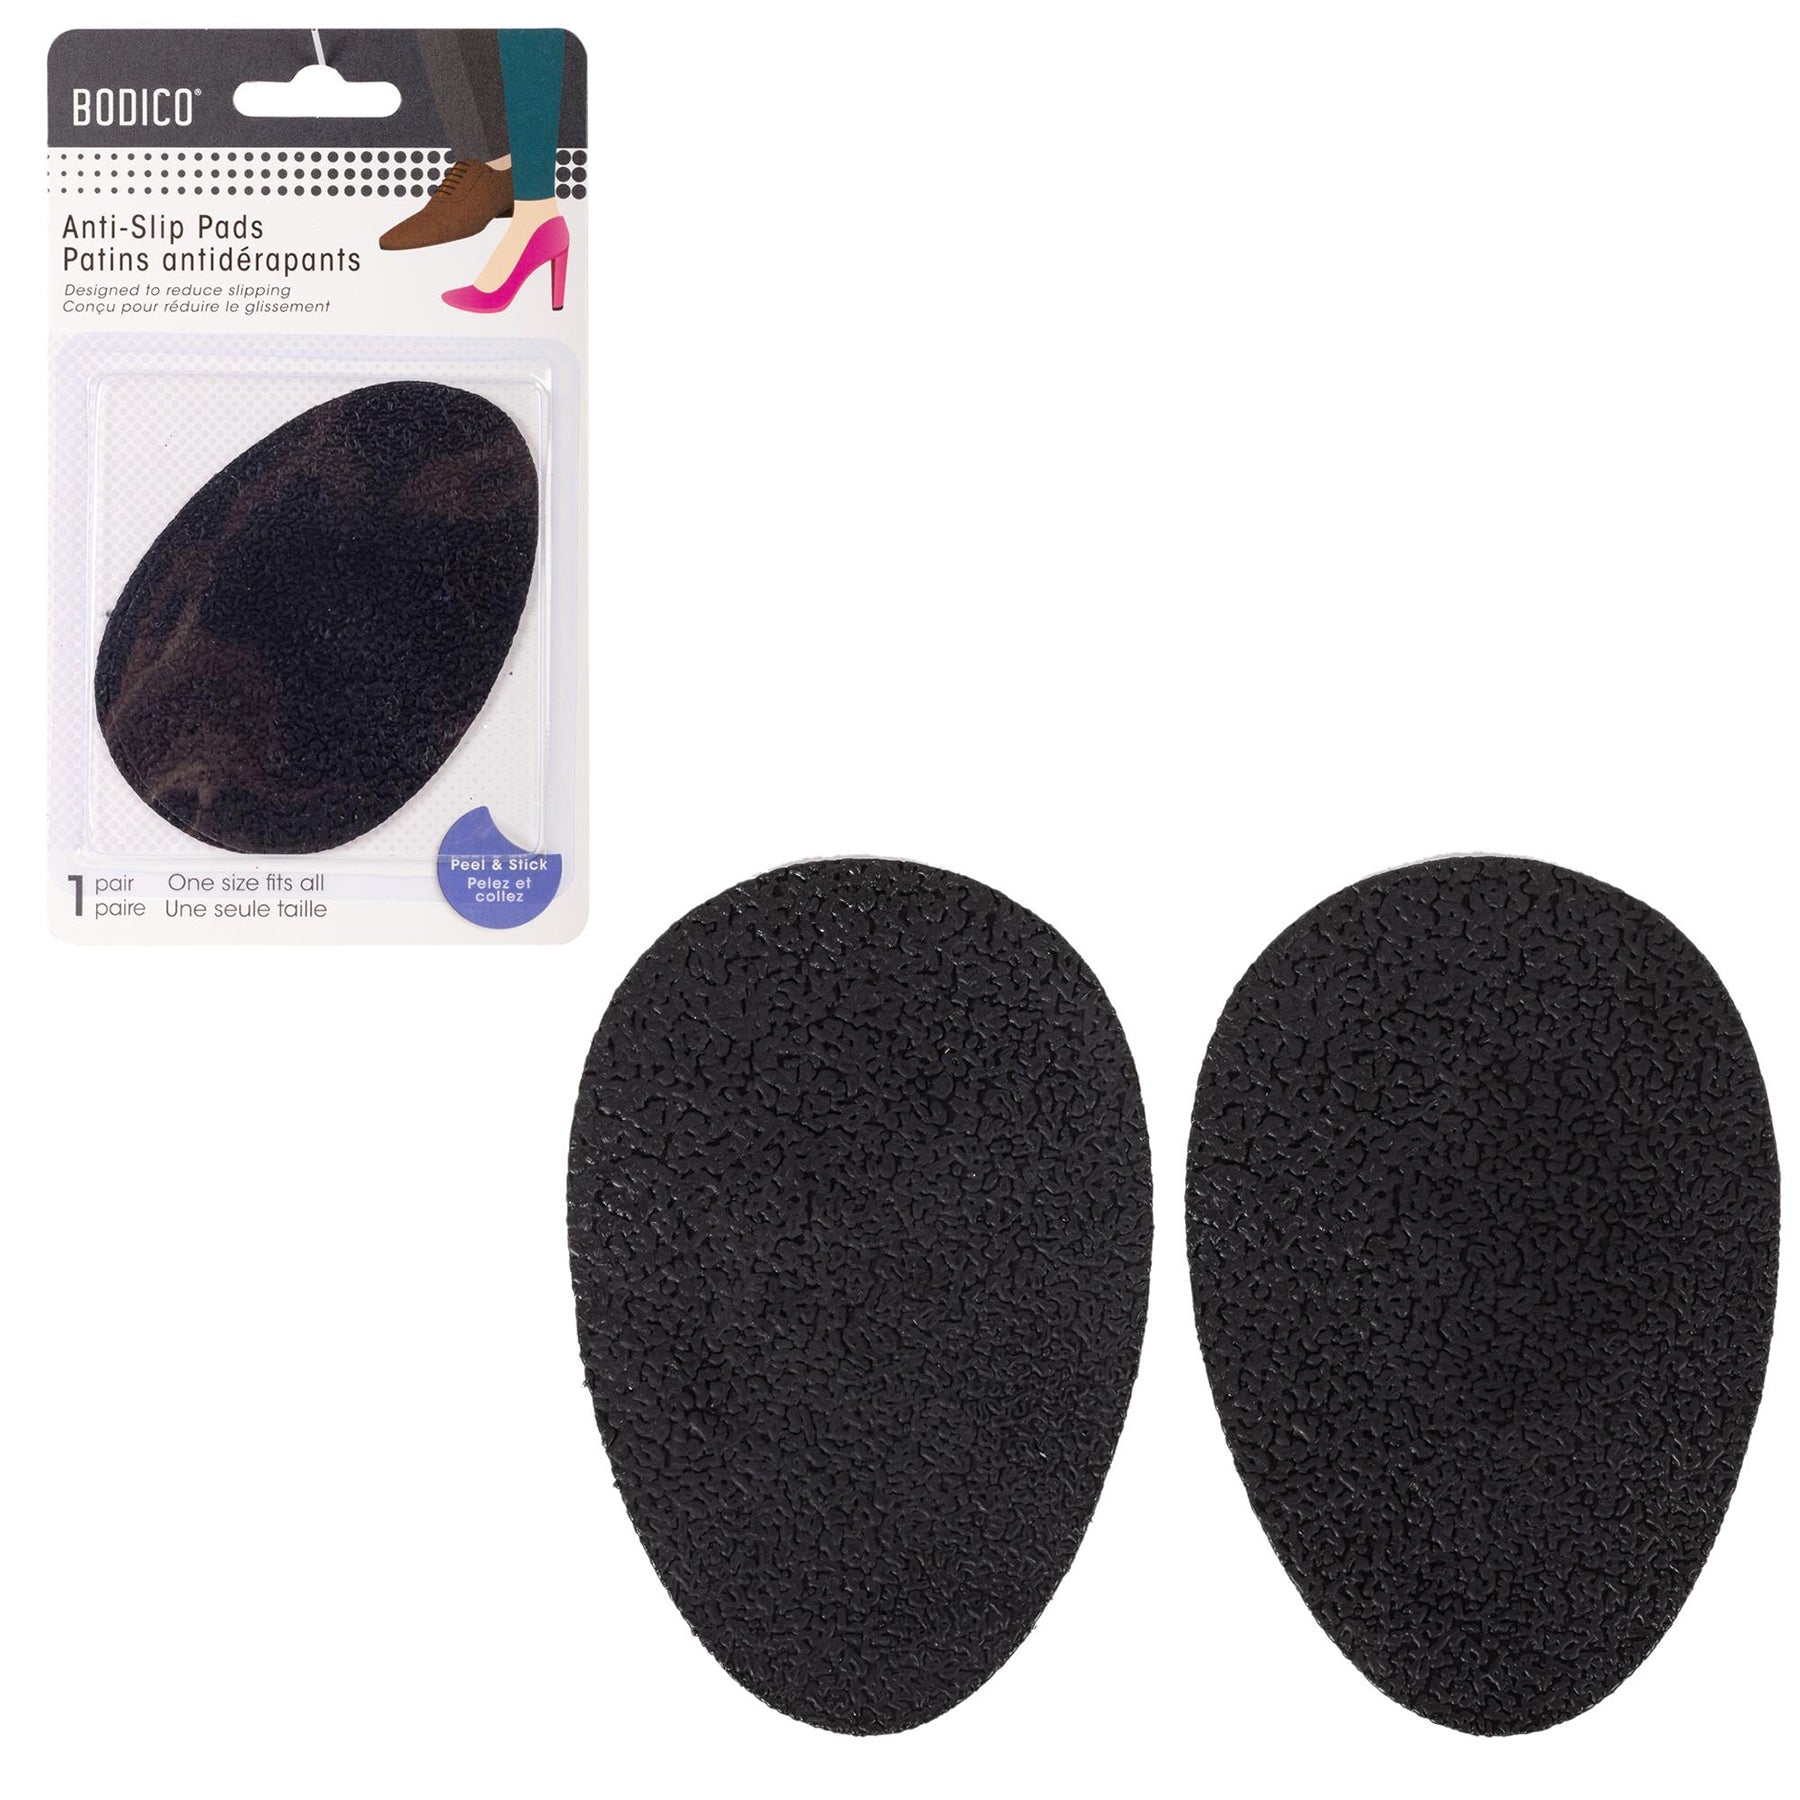 Bodico 1 Pair Anti-Slip Pads for Sole One Size